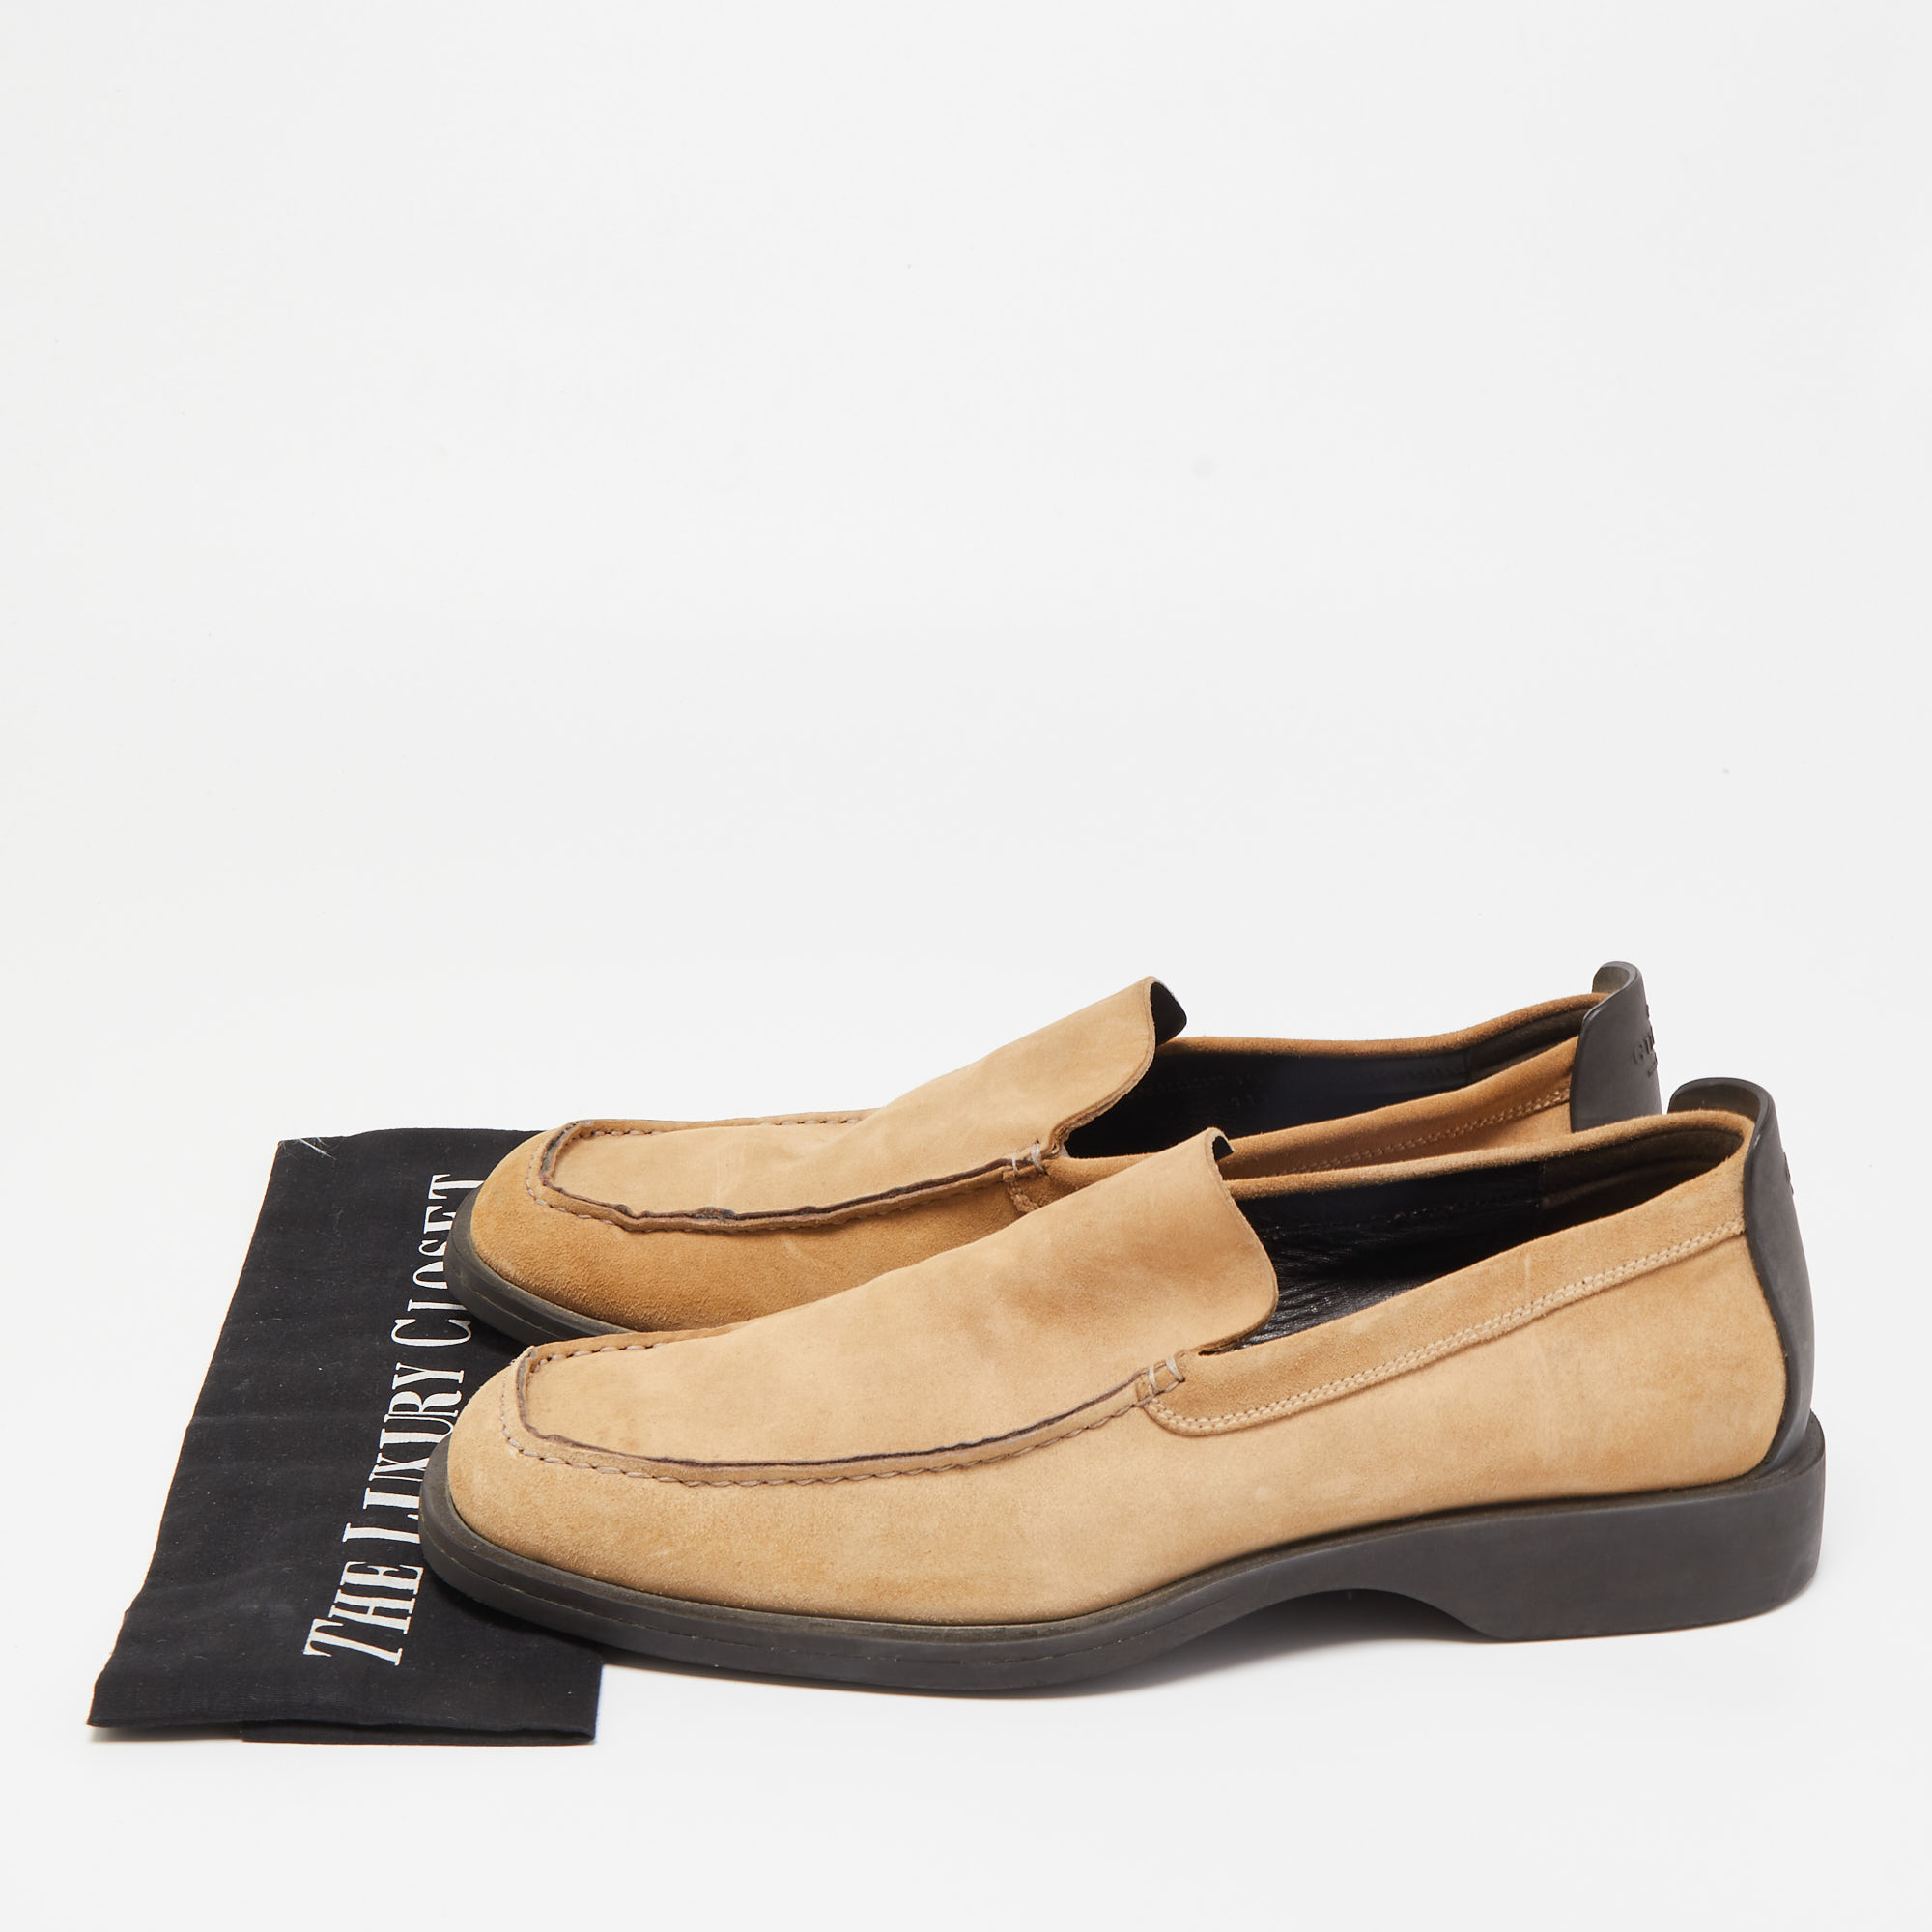 Gucci Beige Suede Slip On Loafers Size 43.5